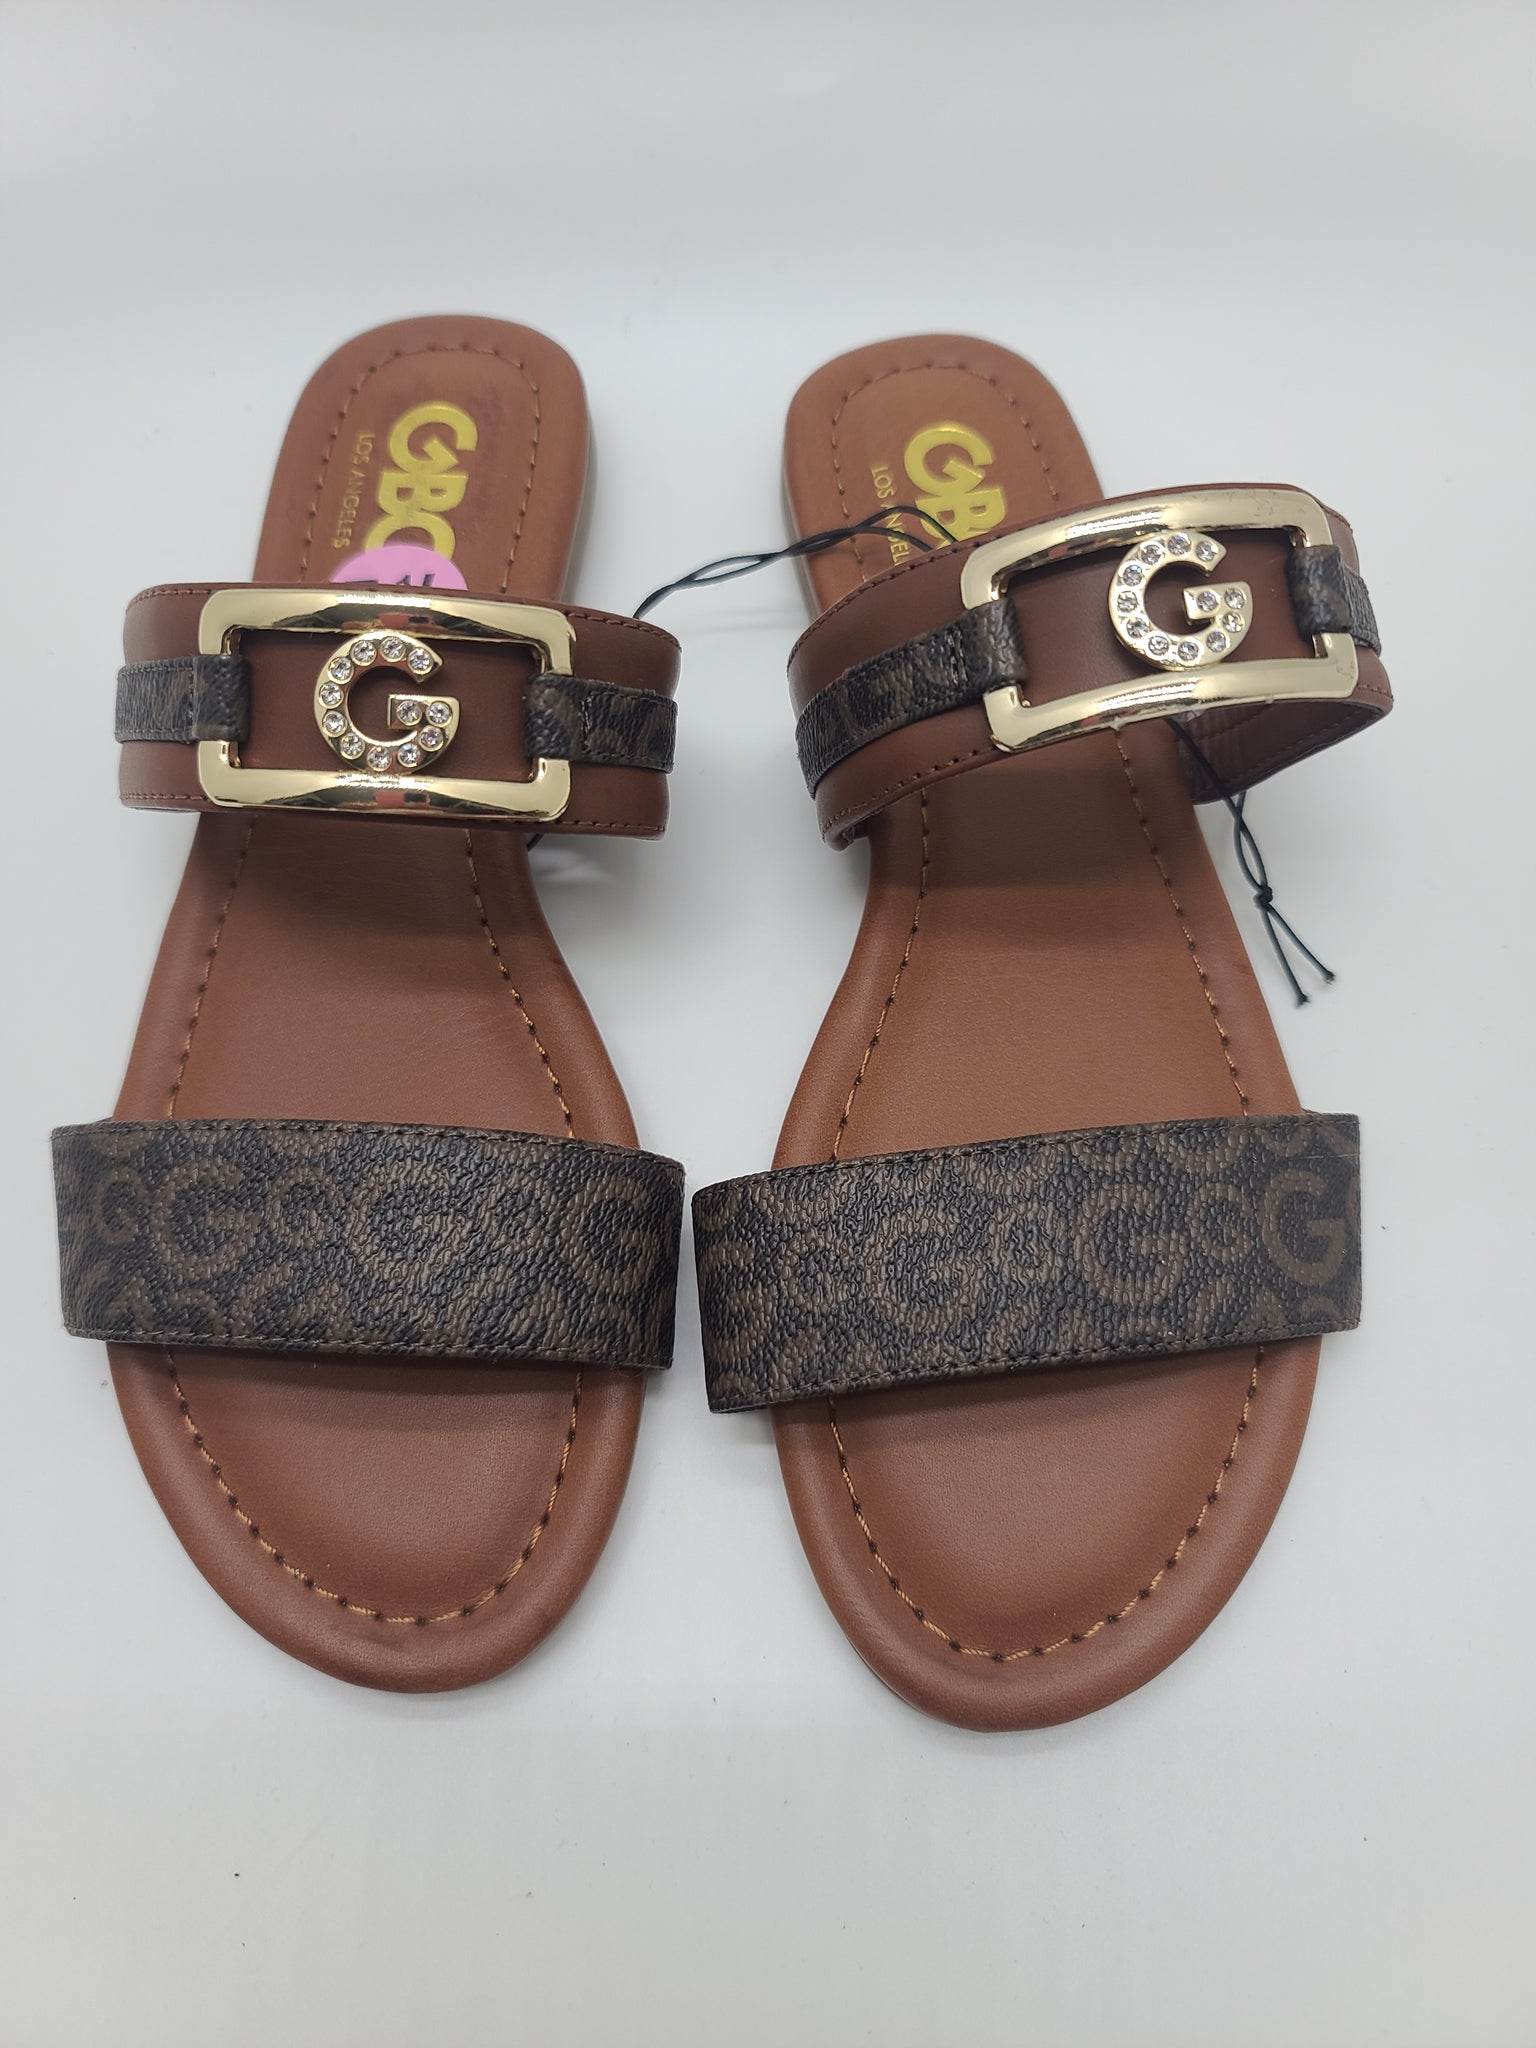 GUESS Sandals (Size 5.5)